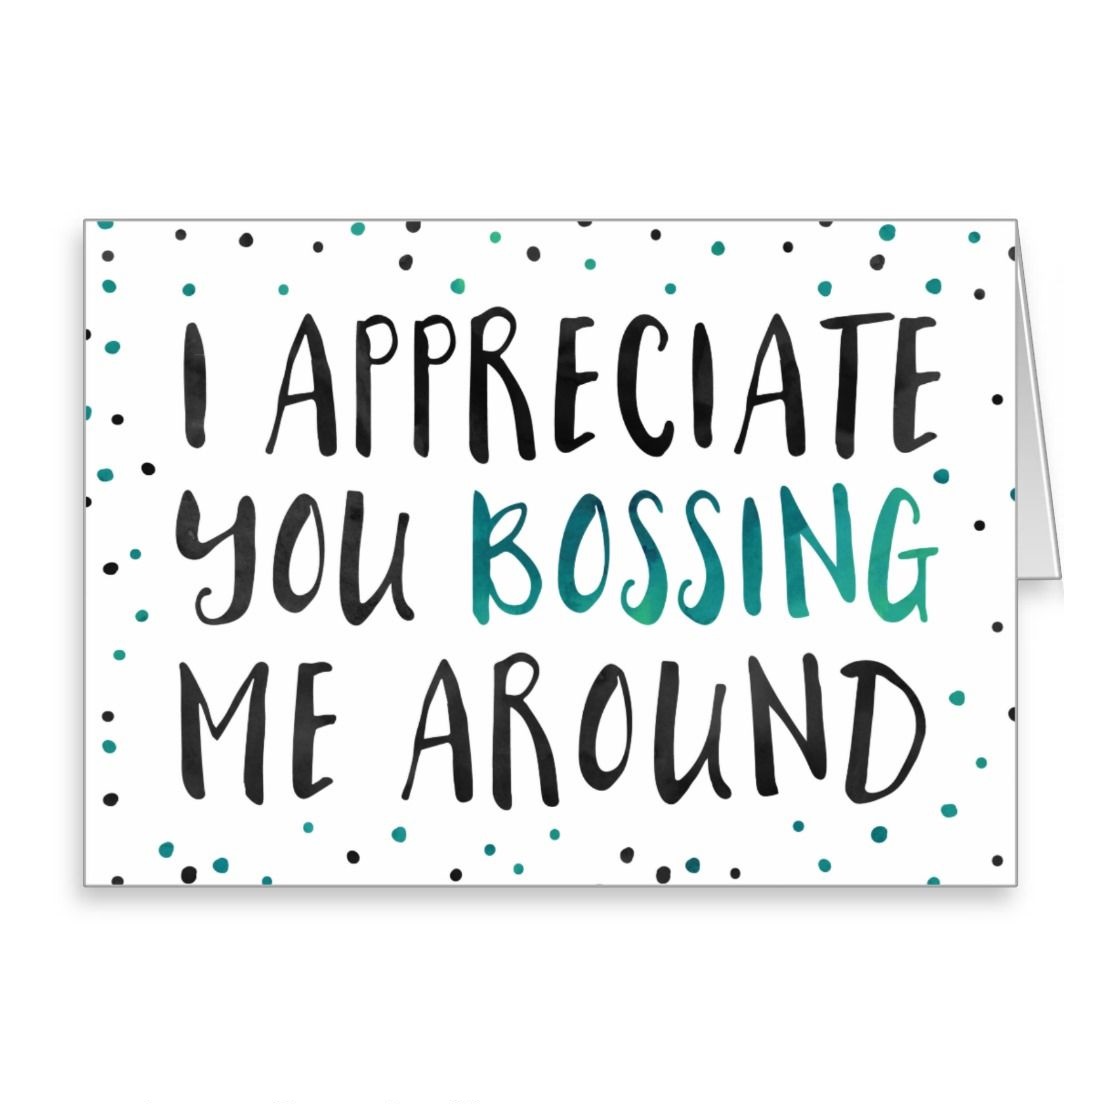 Happy Boss Day Wishes Greeting Cards Free Ecards Gift Cards